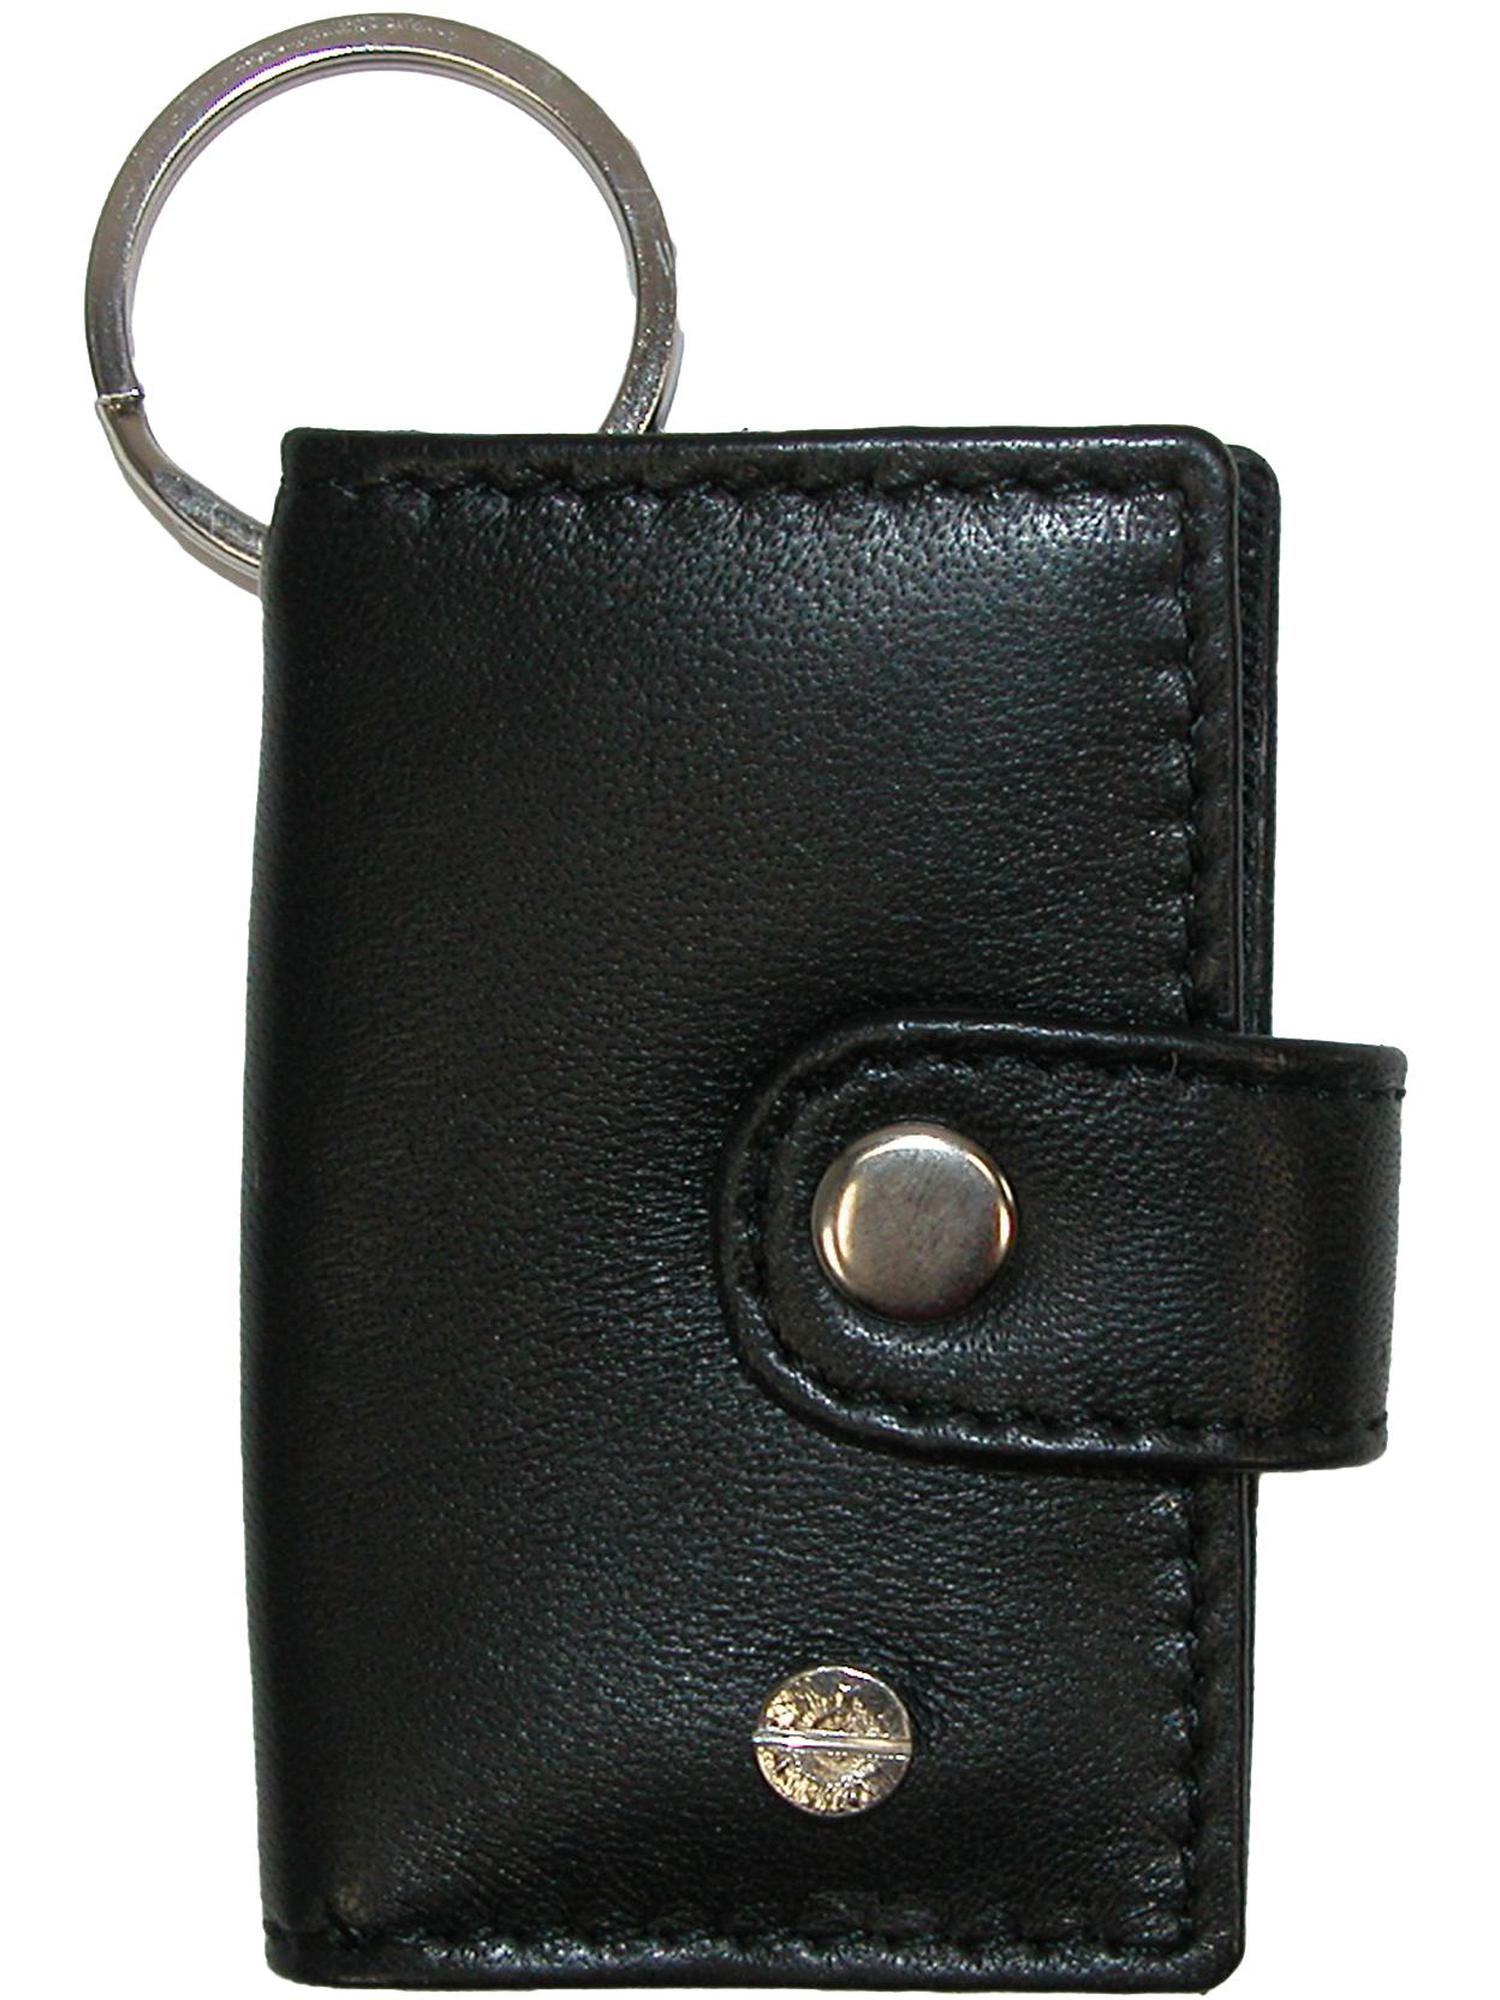 CTM Leather Scan Card Key Chain Wallet - image 1 of 3